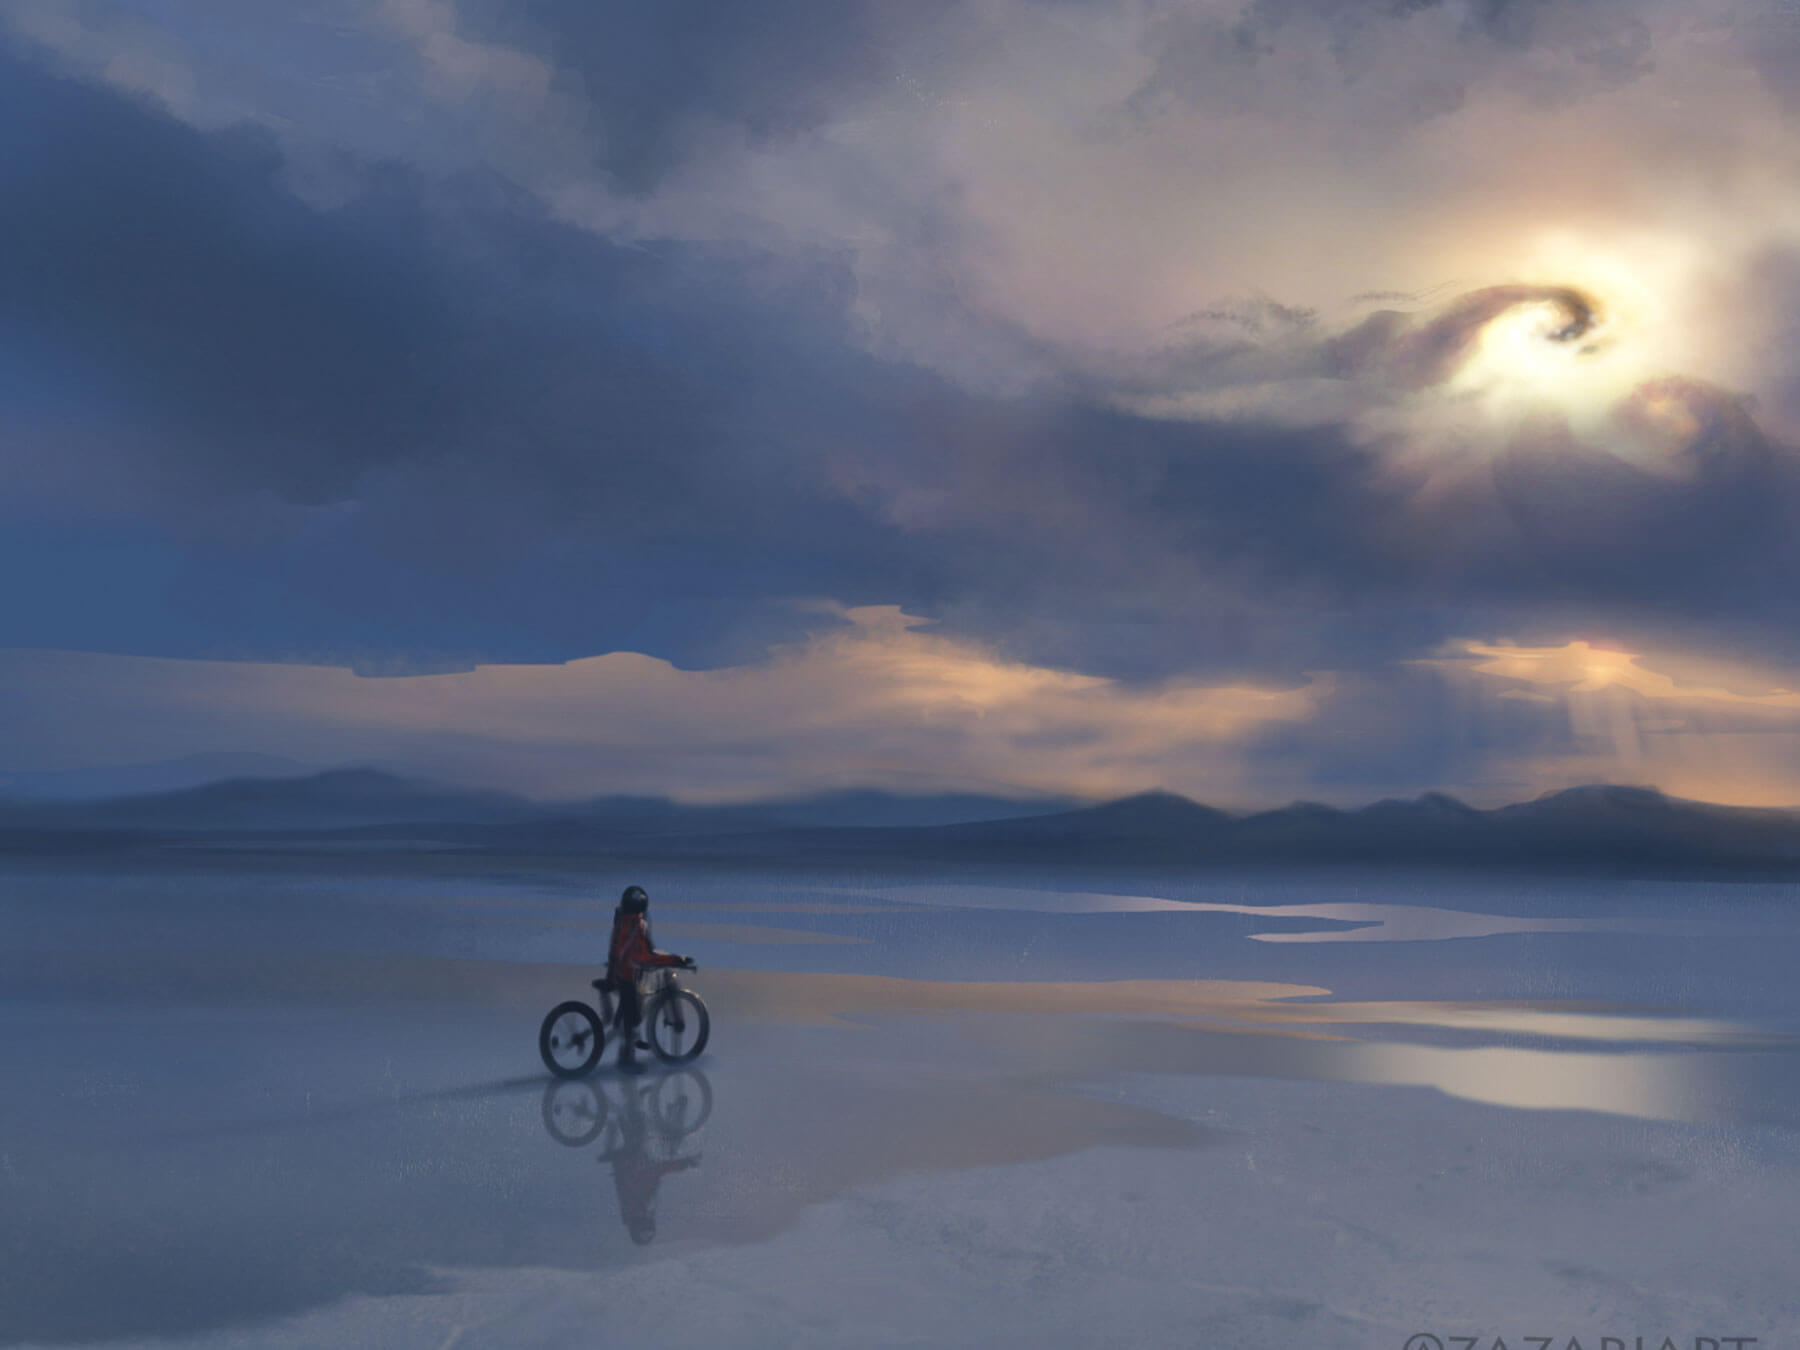 A digital painting of a person on a bike looking out on a body of water at dawn.